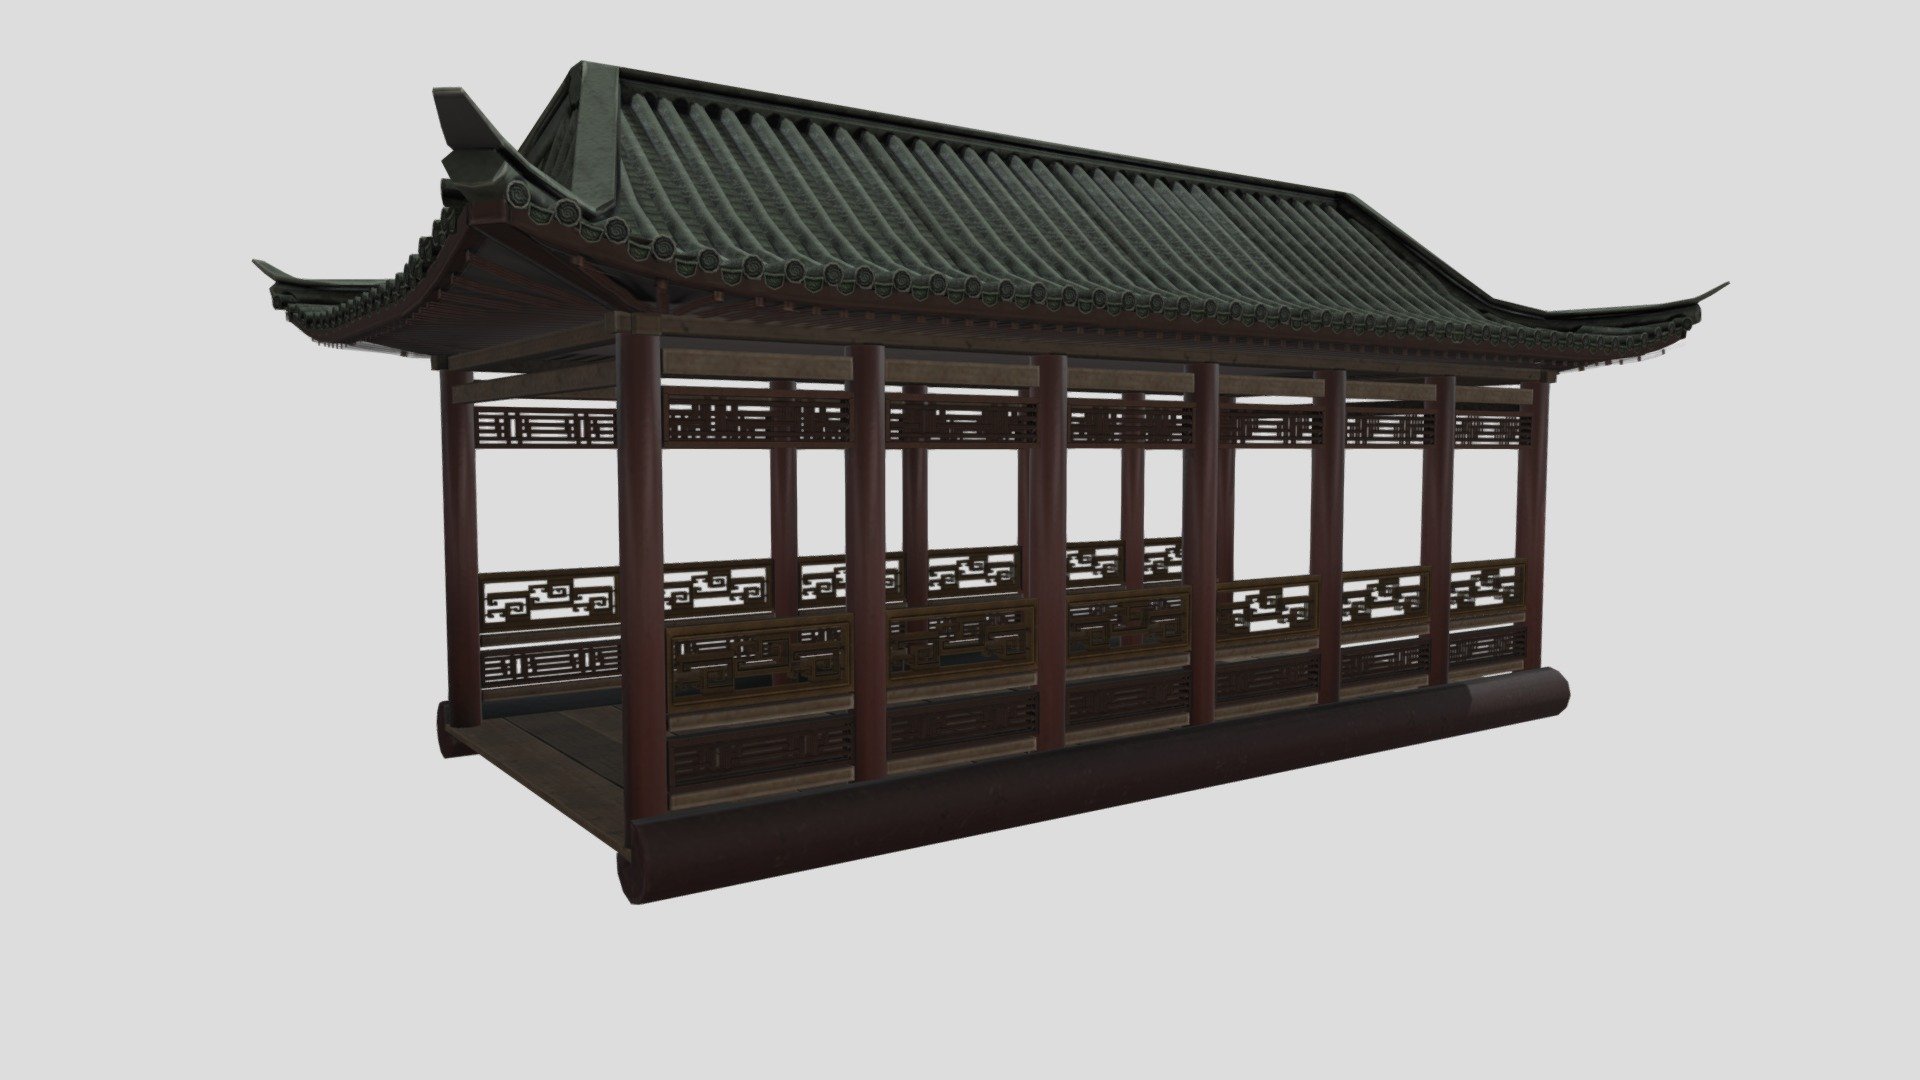 Chinese bridge.
Low poly model with a set of PBR textures.
Can be used to create Asian-style environment.
The model can be used for games 3d model